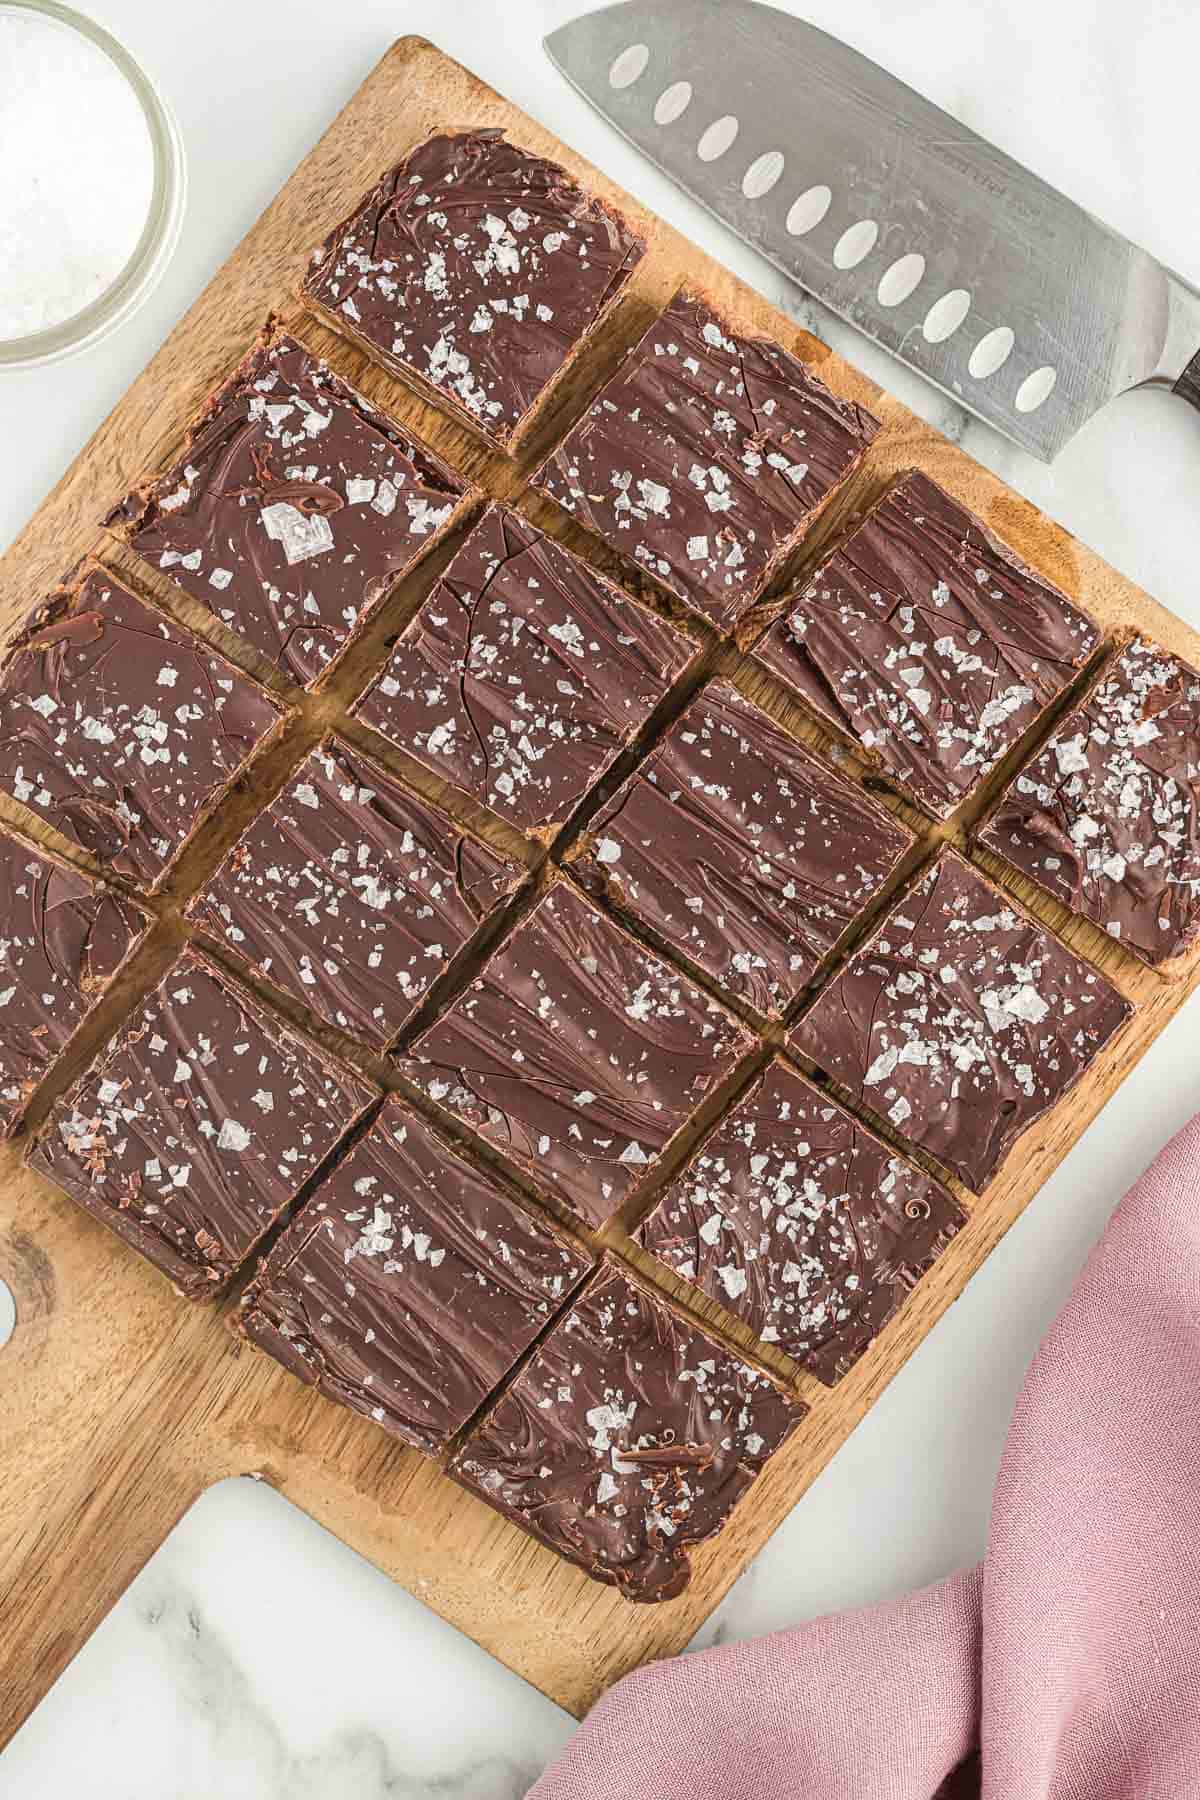 chocolate protein bars cut into slices on a cutting board